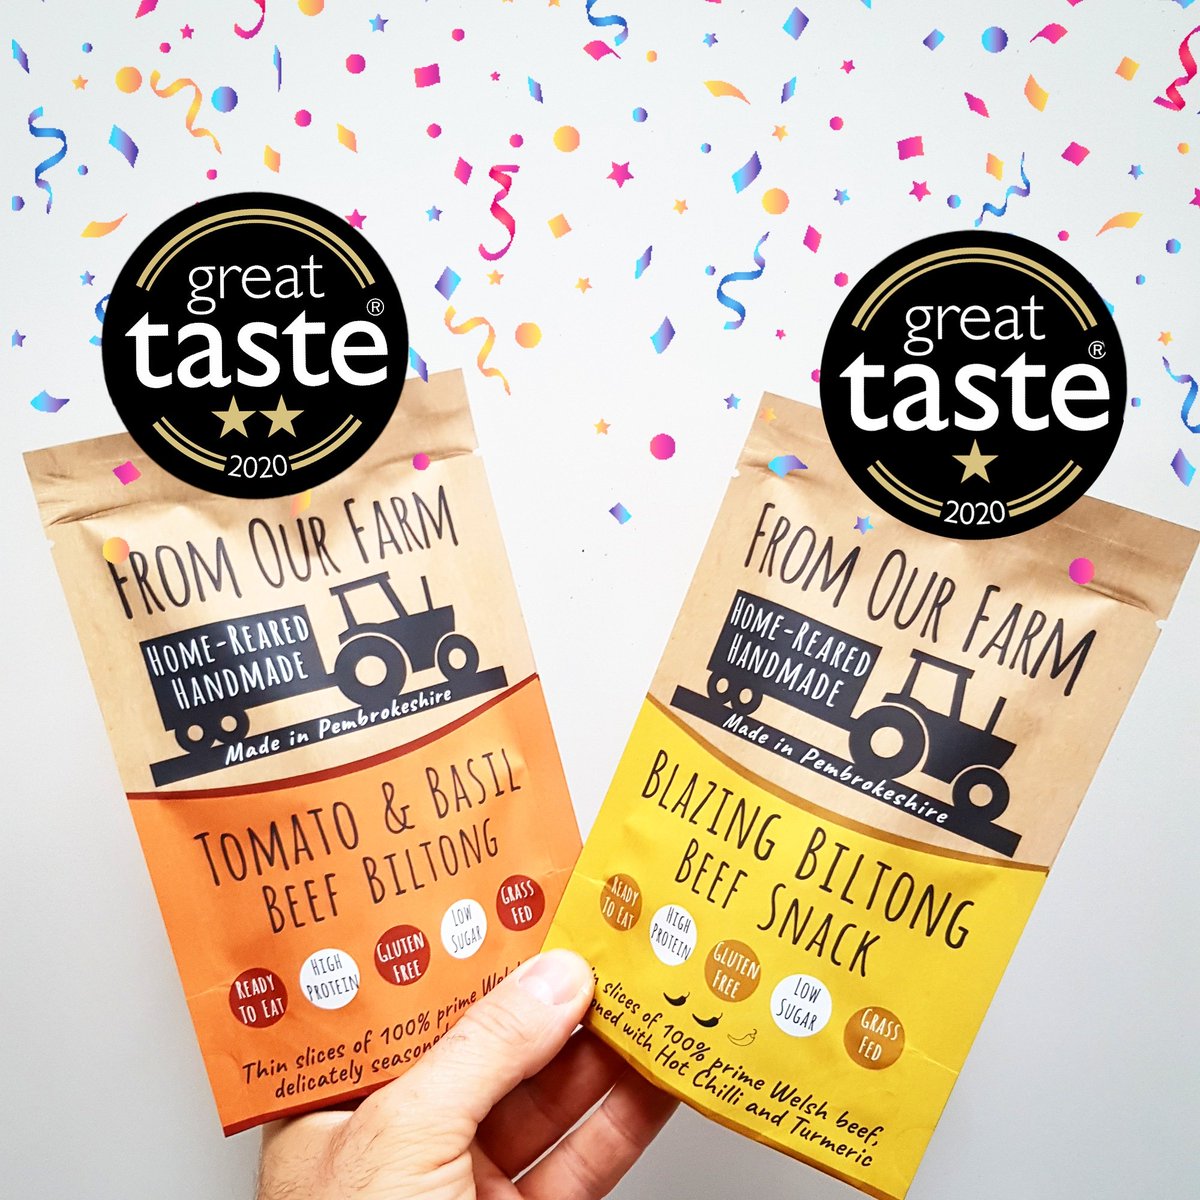 Celebration time! 🍾 Our Tomato & Basil #biltong scooped a 2 star Great Taste award and our Blazing flavour picked up a 1 star too! 😀 Well done to everyone else who got their results yesterday 🤩